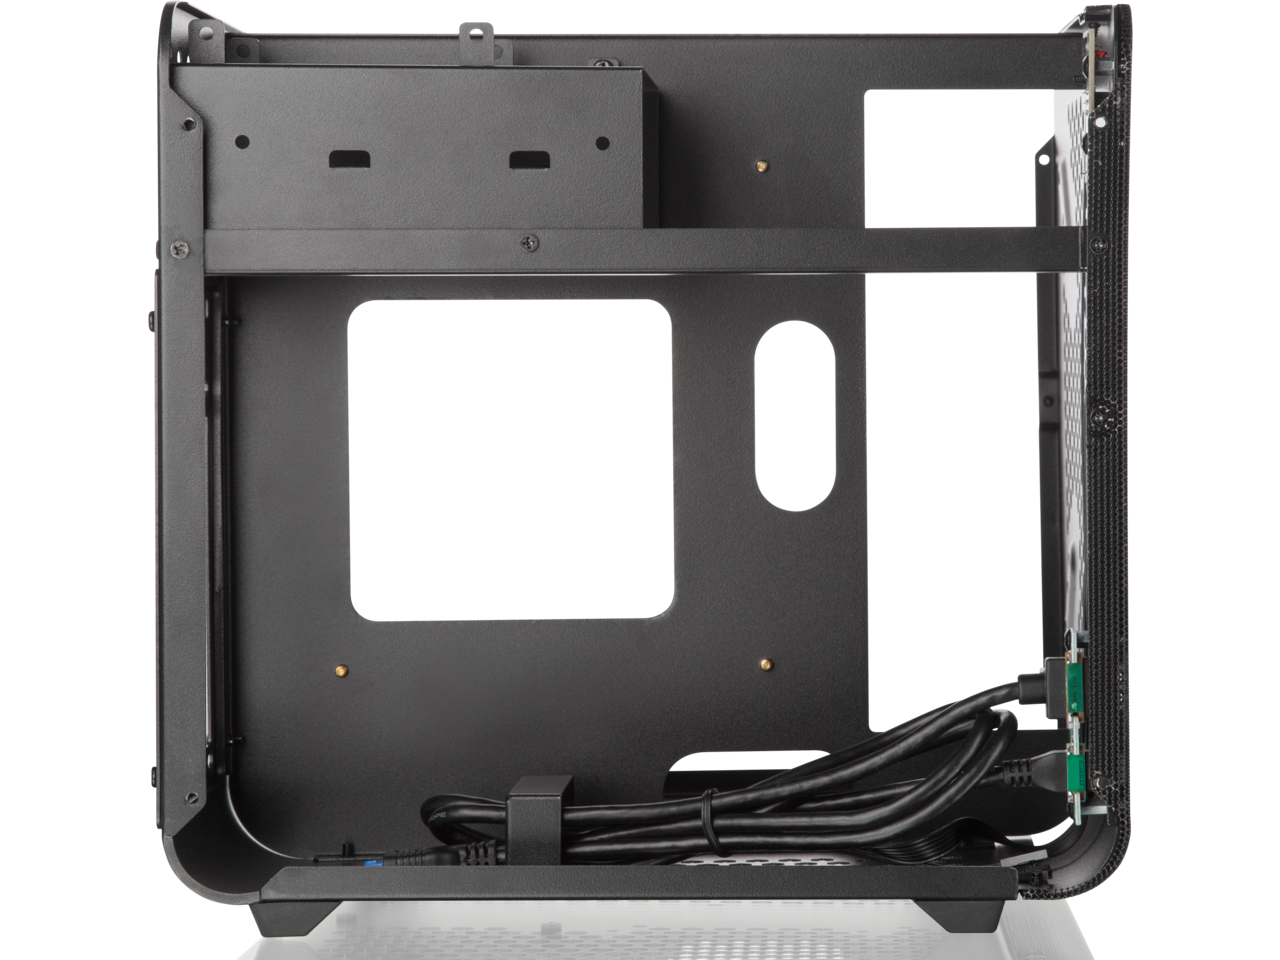 METIS EVO BLUE TGS, an Alu. ITX case with tempered glass, is designed to fulfill the smallest case built with ultra high air flow to solve all thermal issue of SFF chassis, 200mm fan option at front.